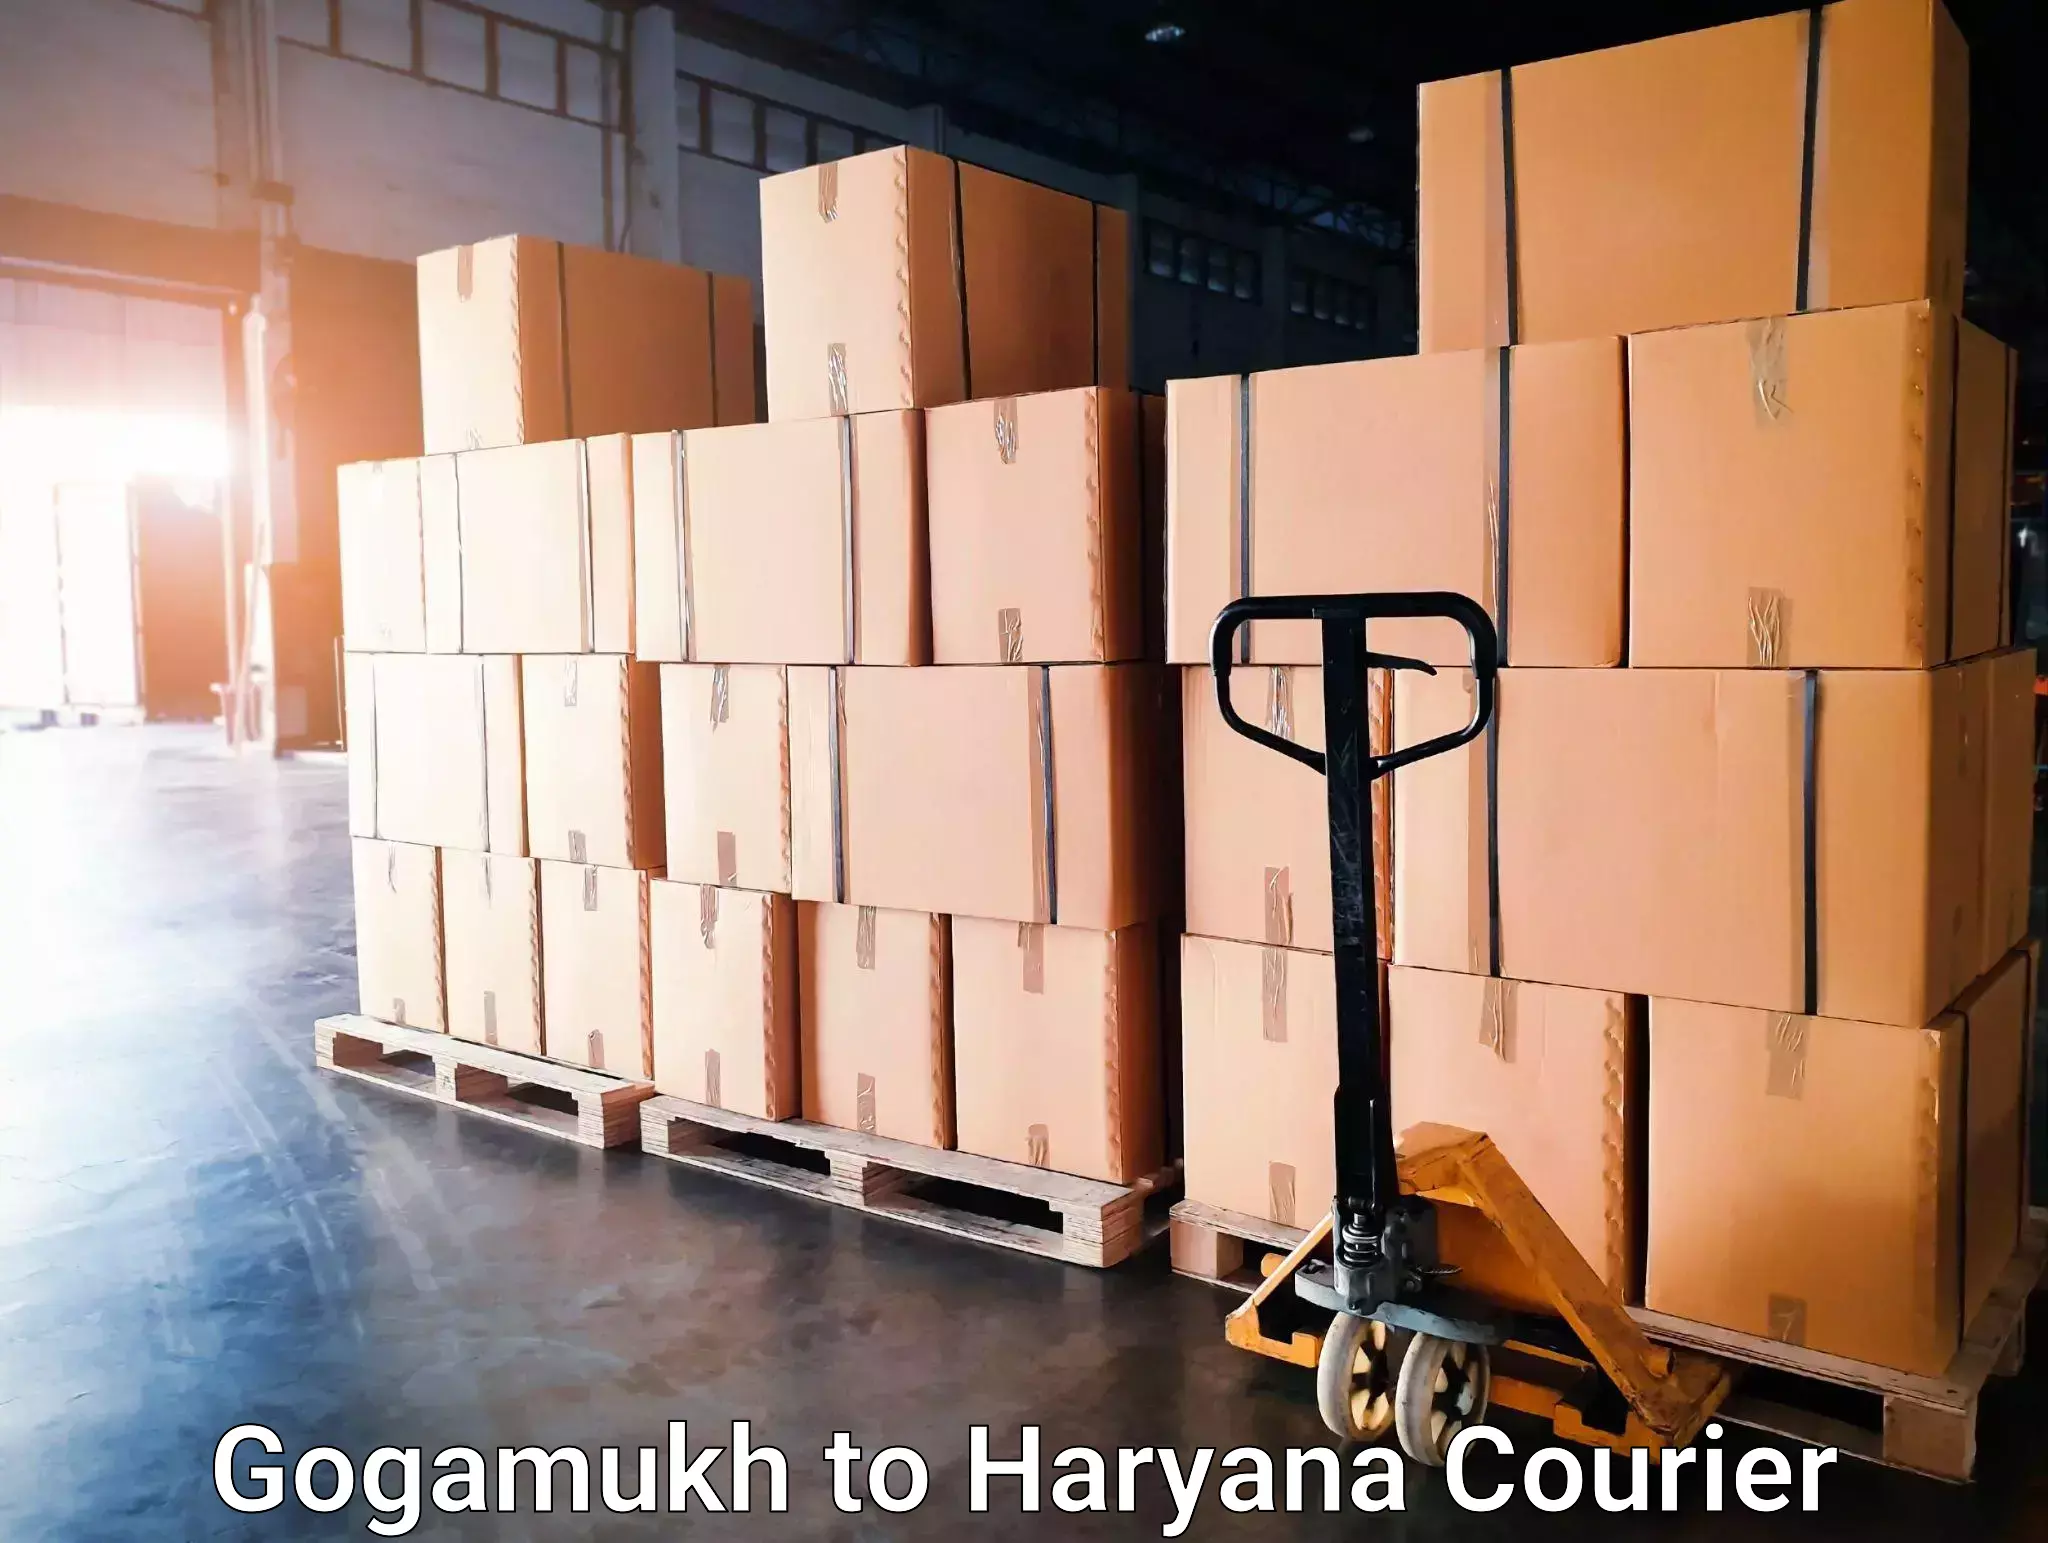 Reliable delivery network Gogamukh to Bhuna